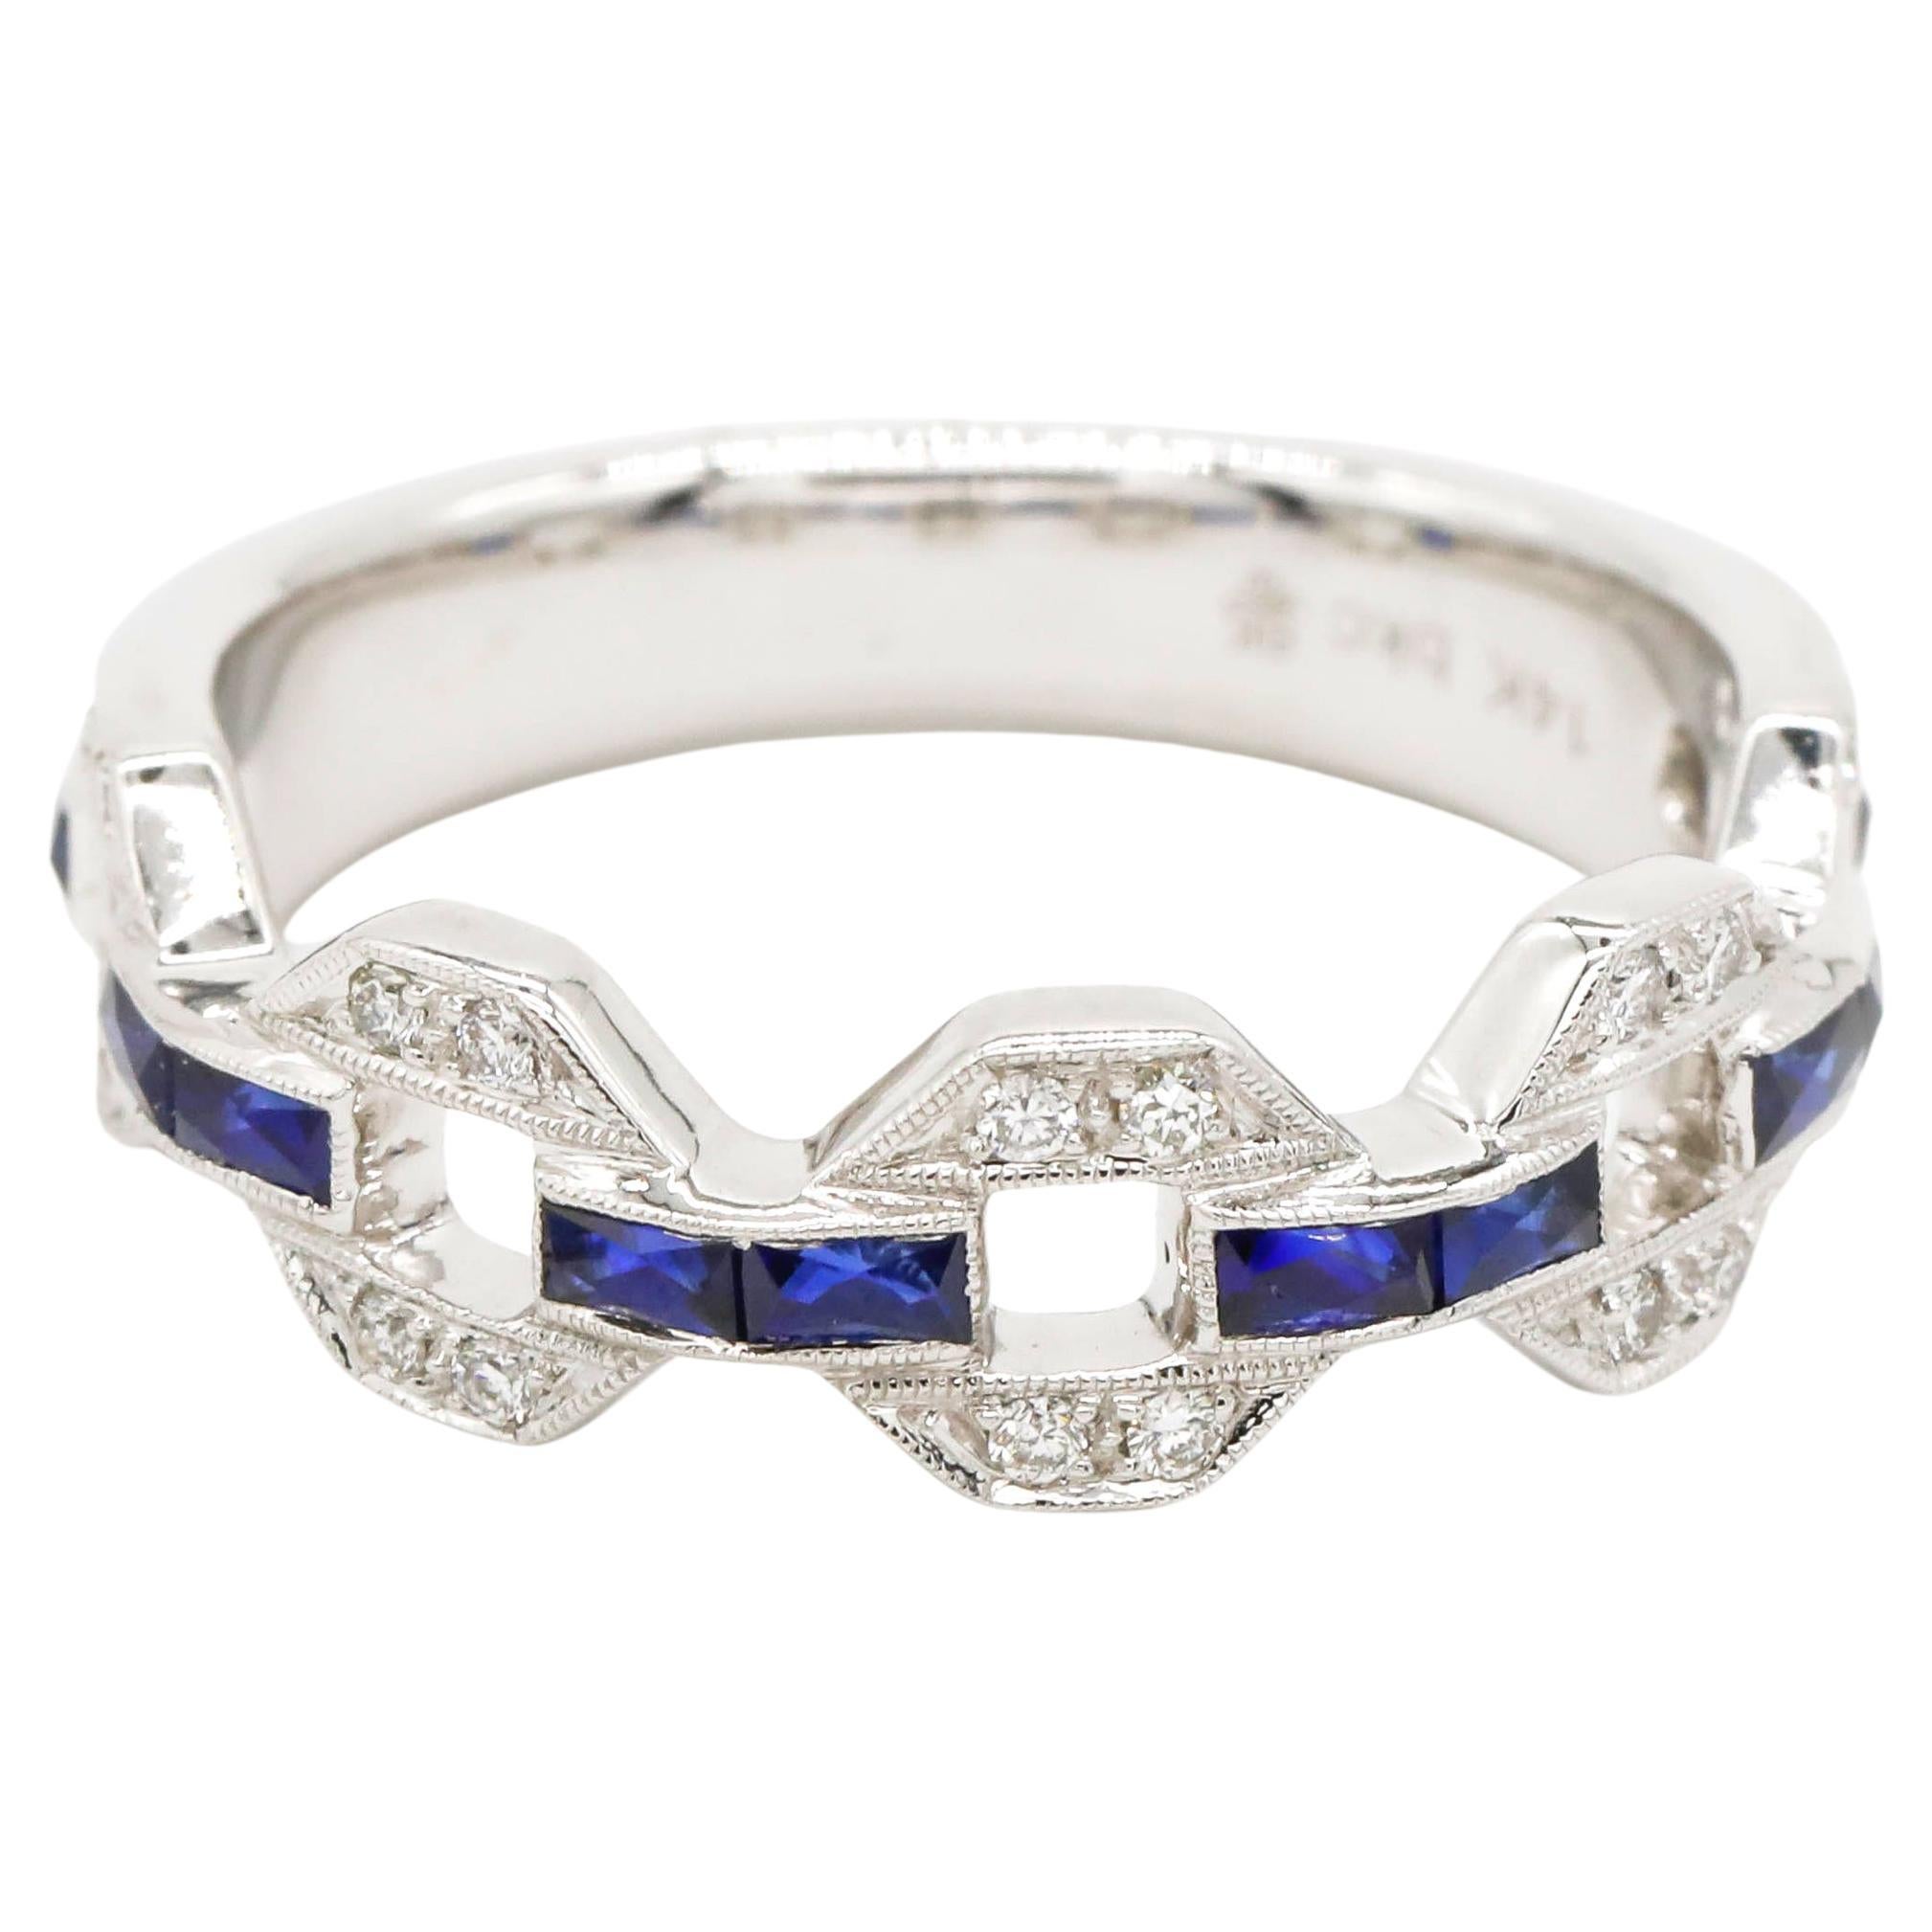 18k White Gold Link Design 0.12 Ct Round Cut Diamond Pave Sapphire Band Ring For Sale